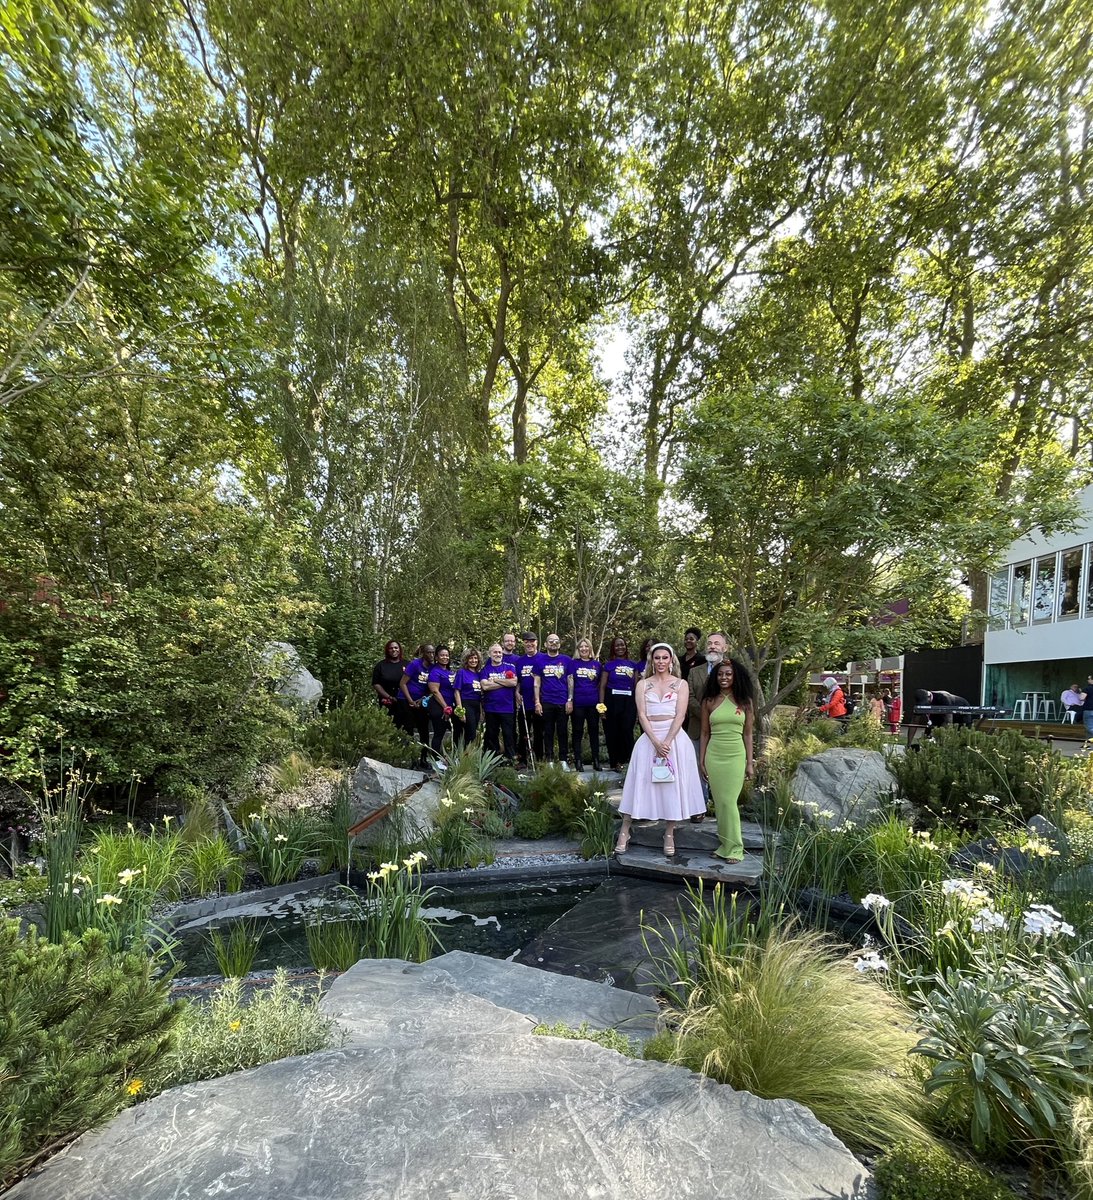 Amazing to have Joyful Noise, a choir of people living with HIV, open the Bridge to 2030 garden at @the_rhs #ChelseaFlowerShow. Our co-founder @RupertWhitaker, patron @beverleyknight and supporter @Vicki_Vivacious listened as the choir sang, raising awareness of HIV to visitors.